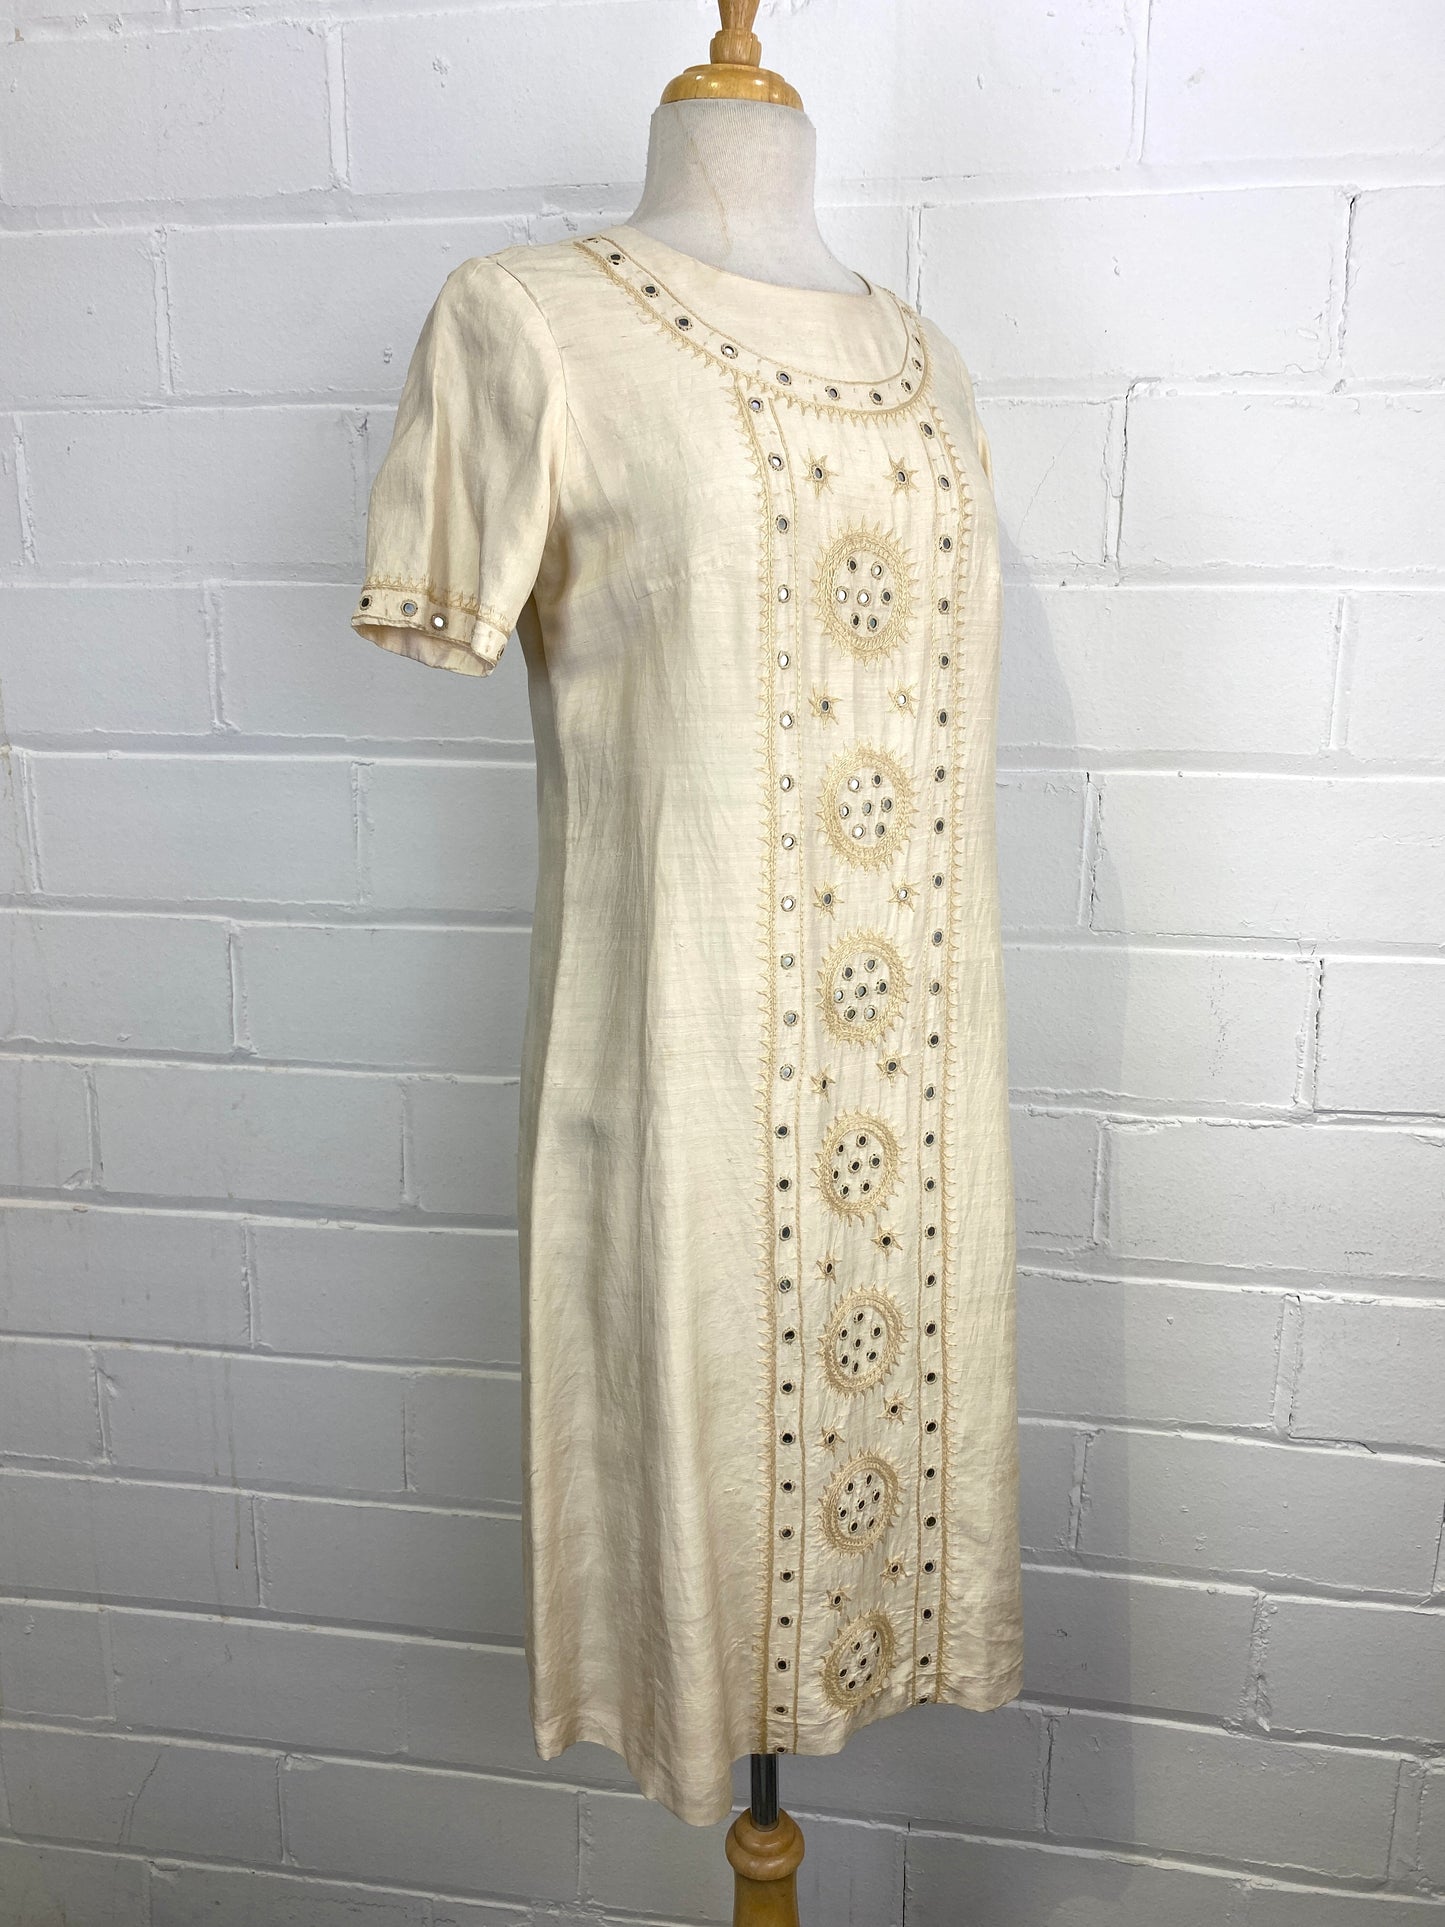 Vintage 1960s Ivory Silk Short-Sleeve Mirror Disk Embroidery Shift Dress, Large